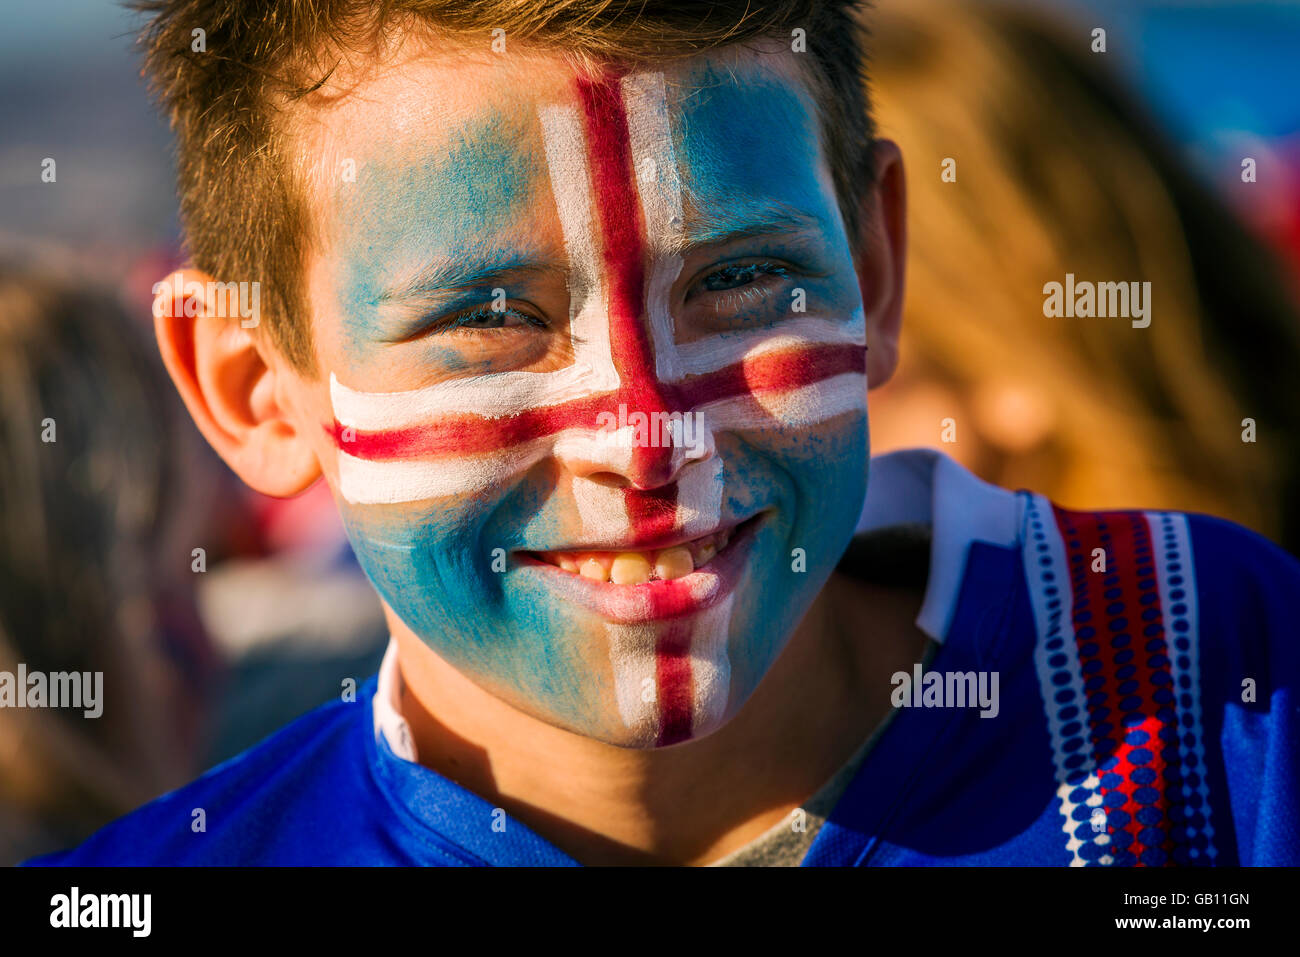 Boy with painted face, supporting Iceland in the UEFA Euro 2016 football tournament, Reykjavik, Iceland. Stock Photo